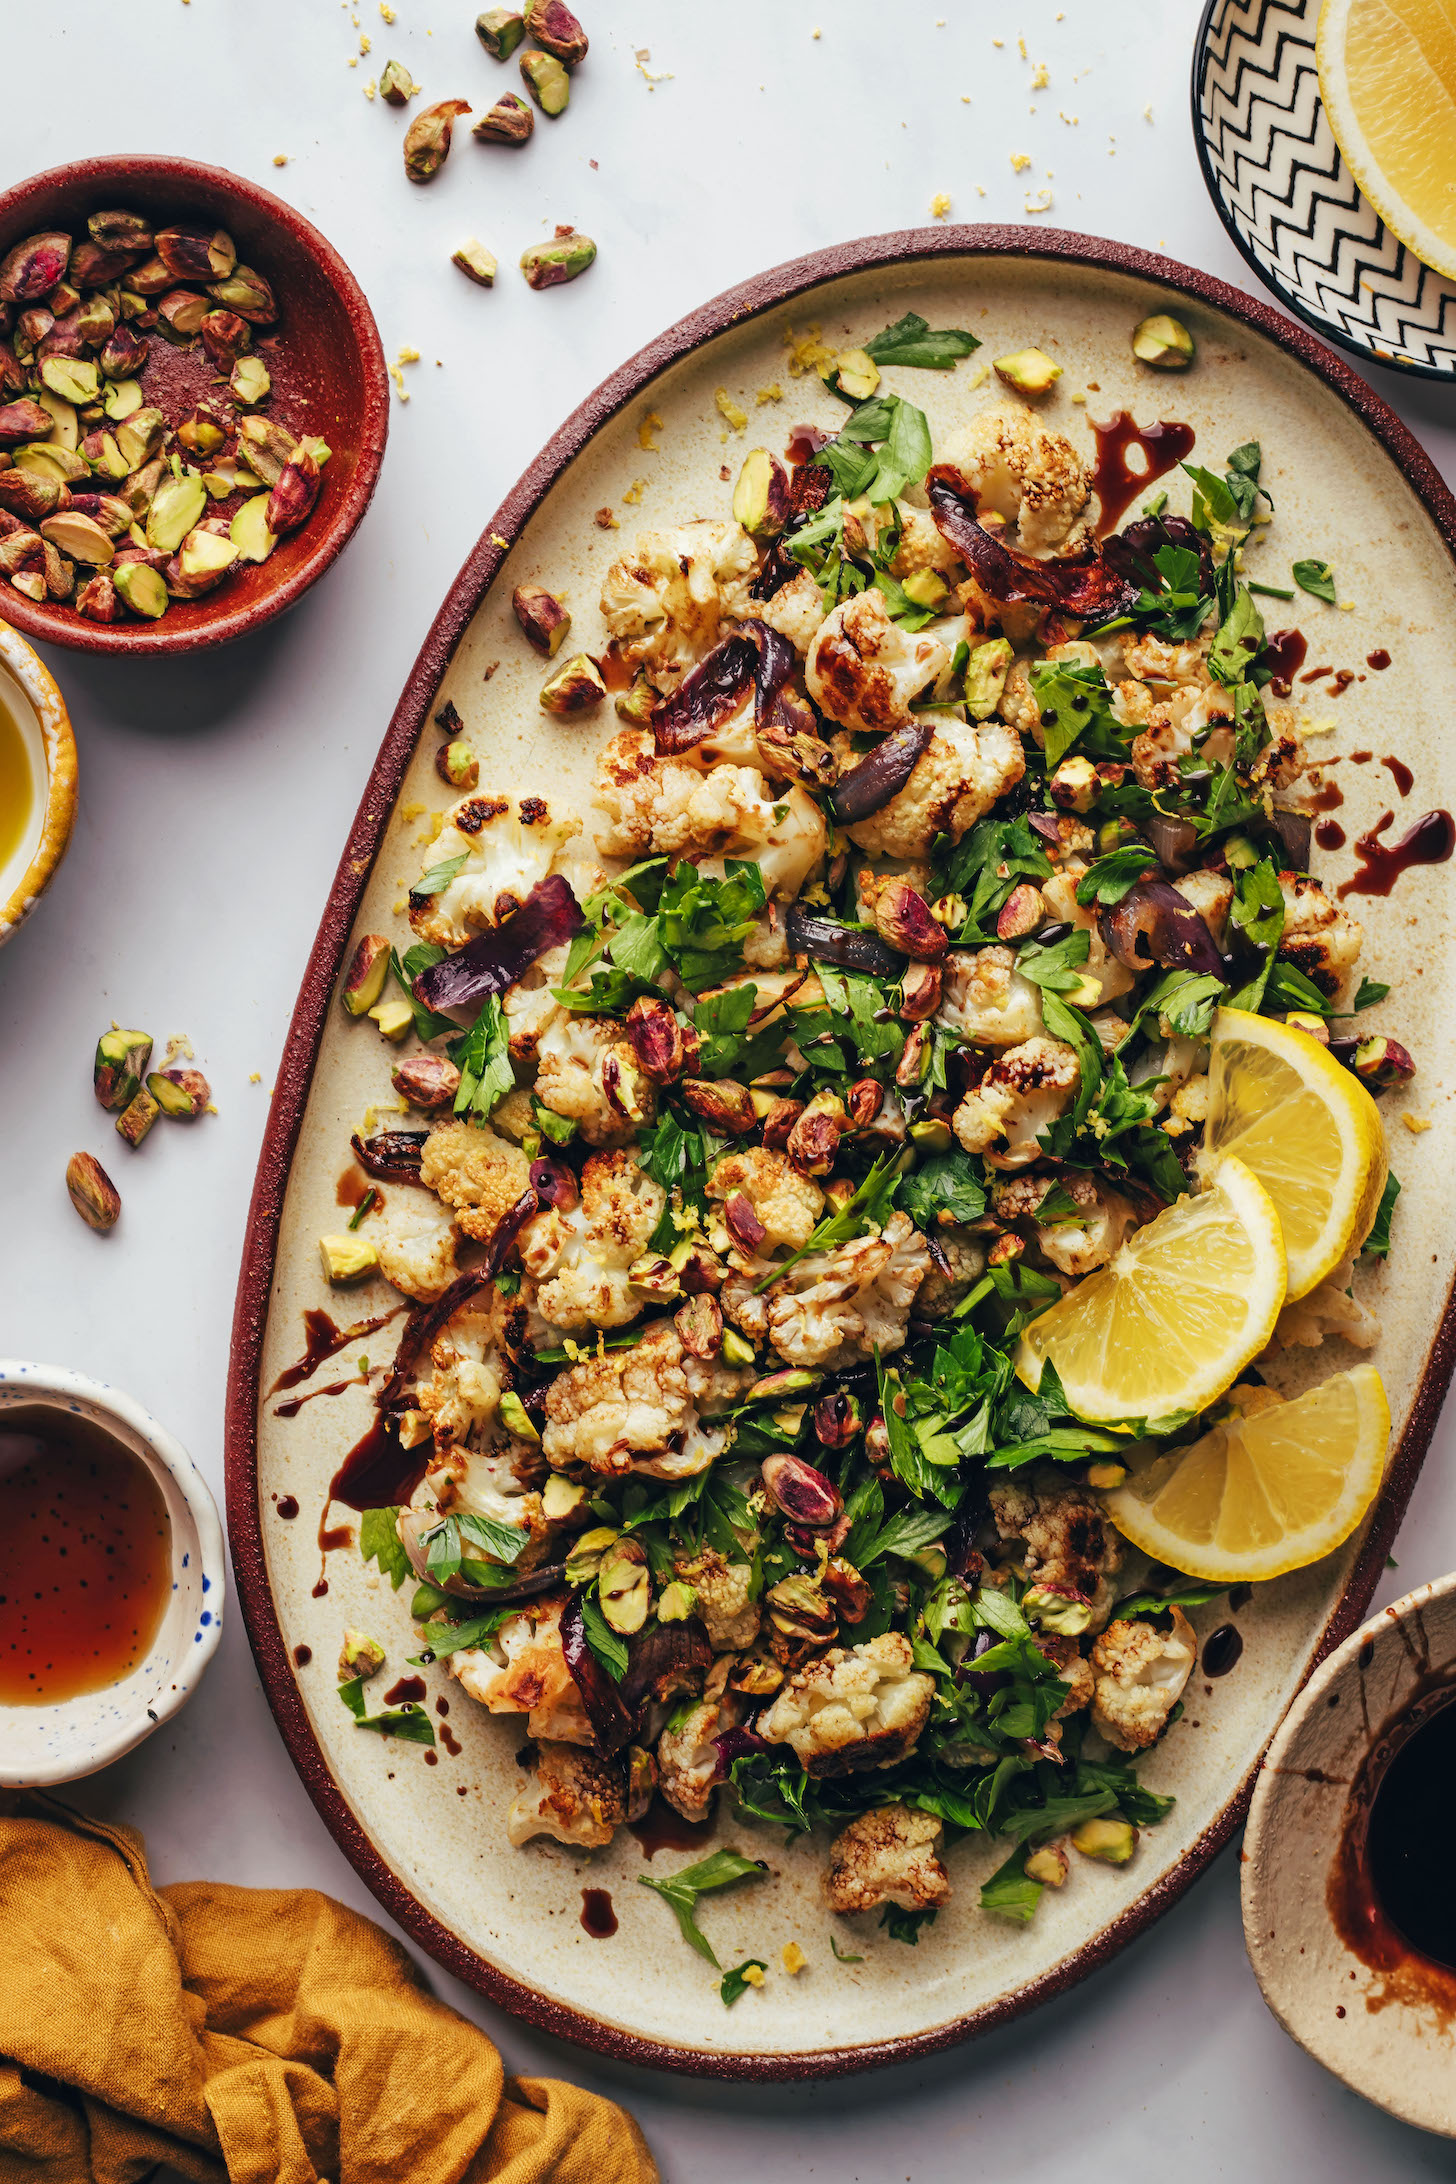 Pistachios and lemon slices next to a platter of our roasted cauliflower salad recipe